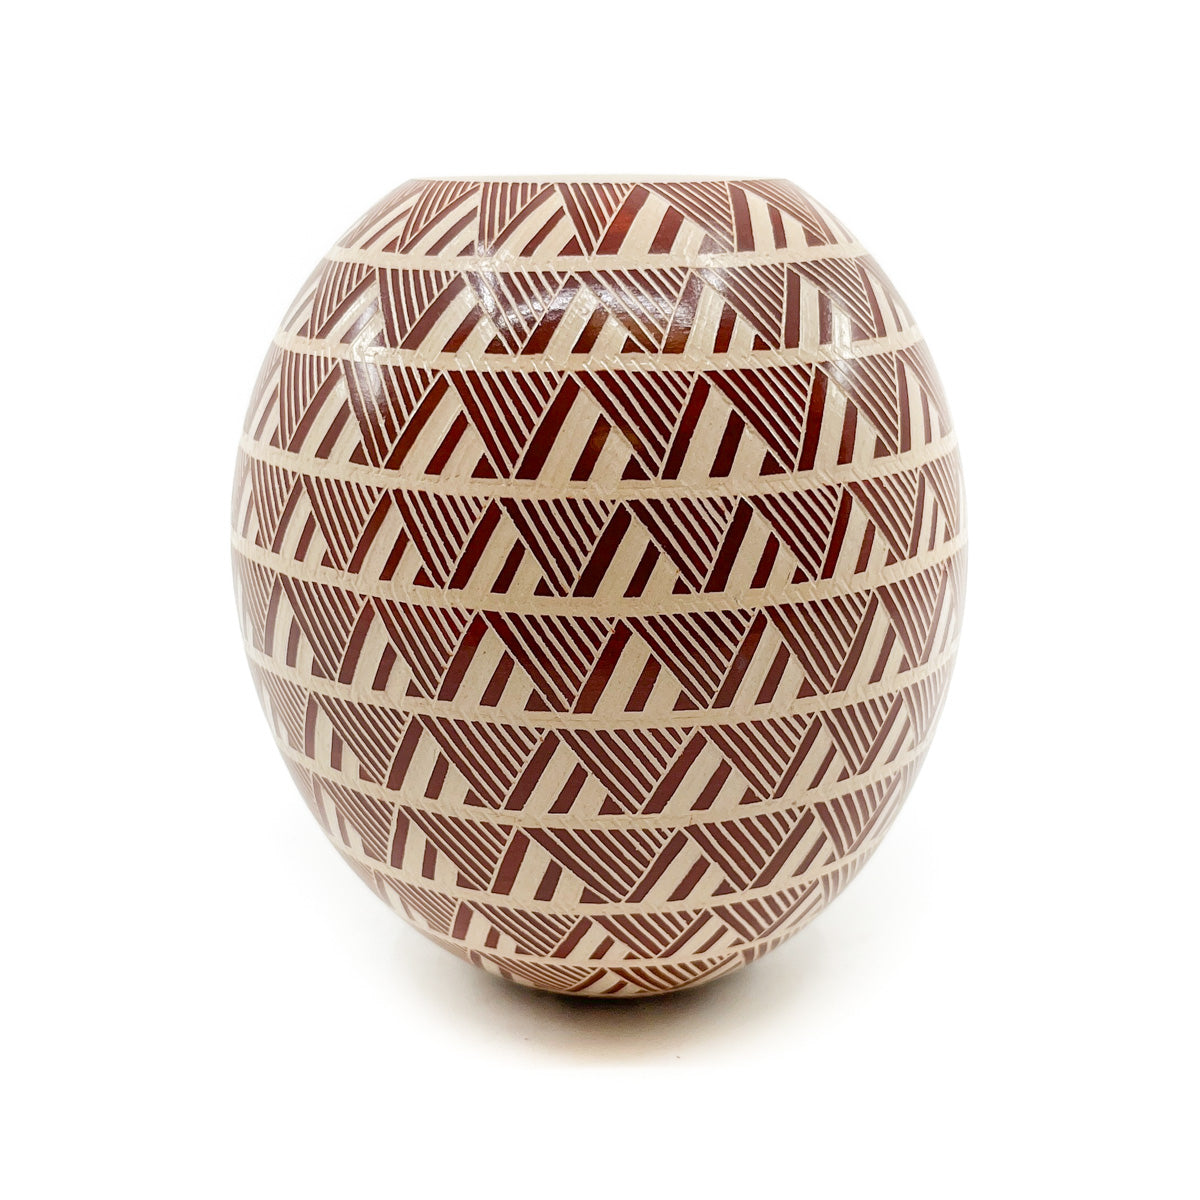 Sgraffito and Painted Geometric Designs on White Clay